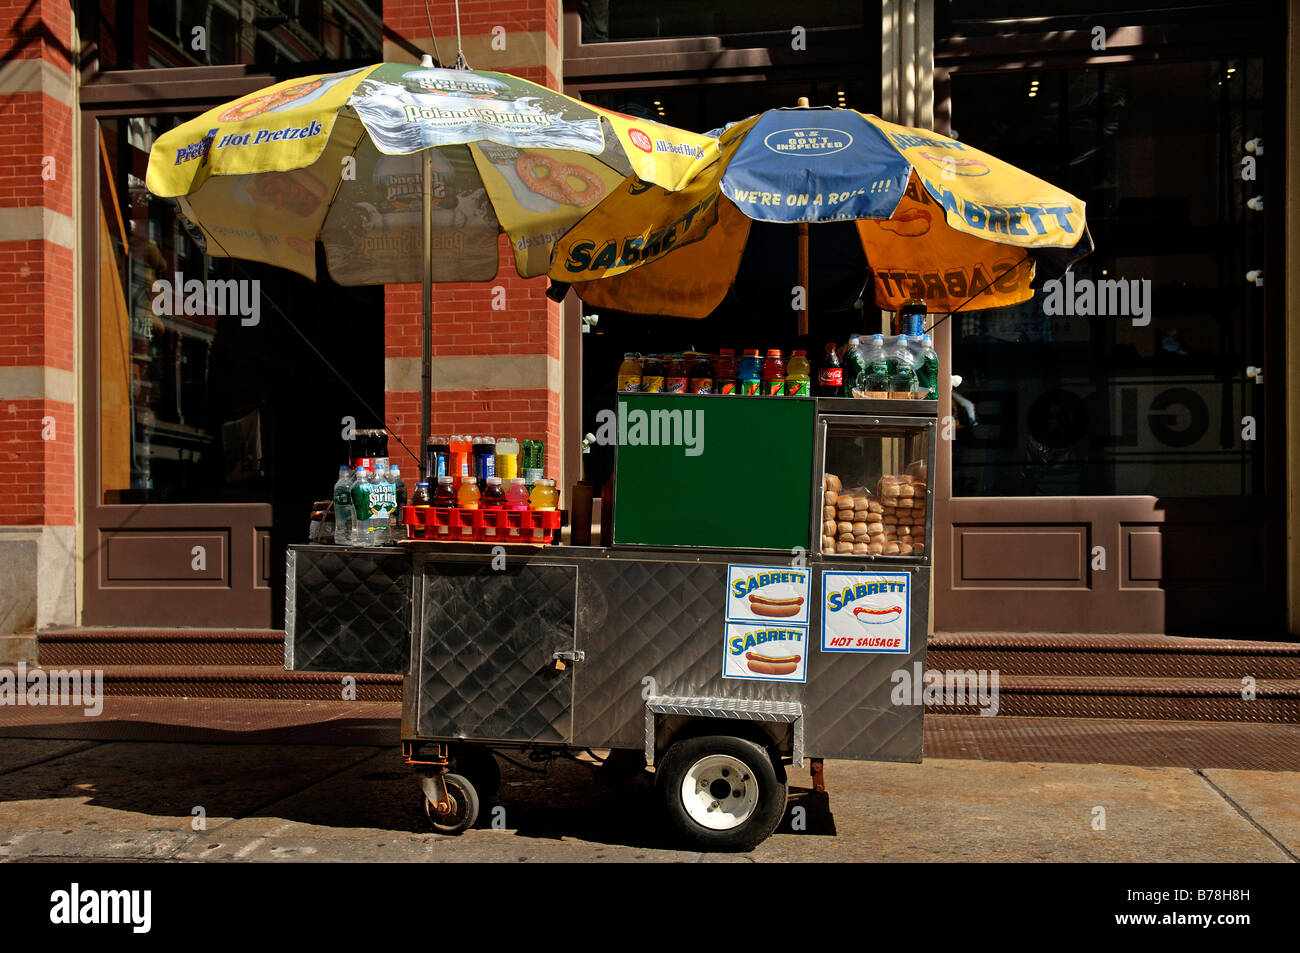 Hot dog stall in Downtown, New York City, USA Stock Photo